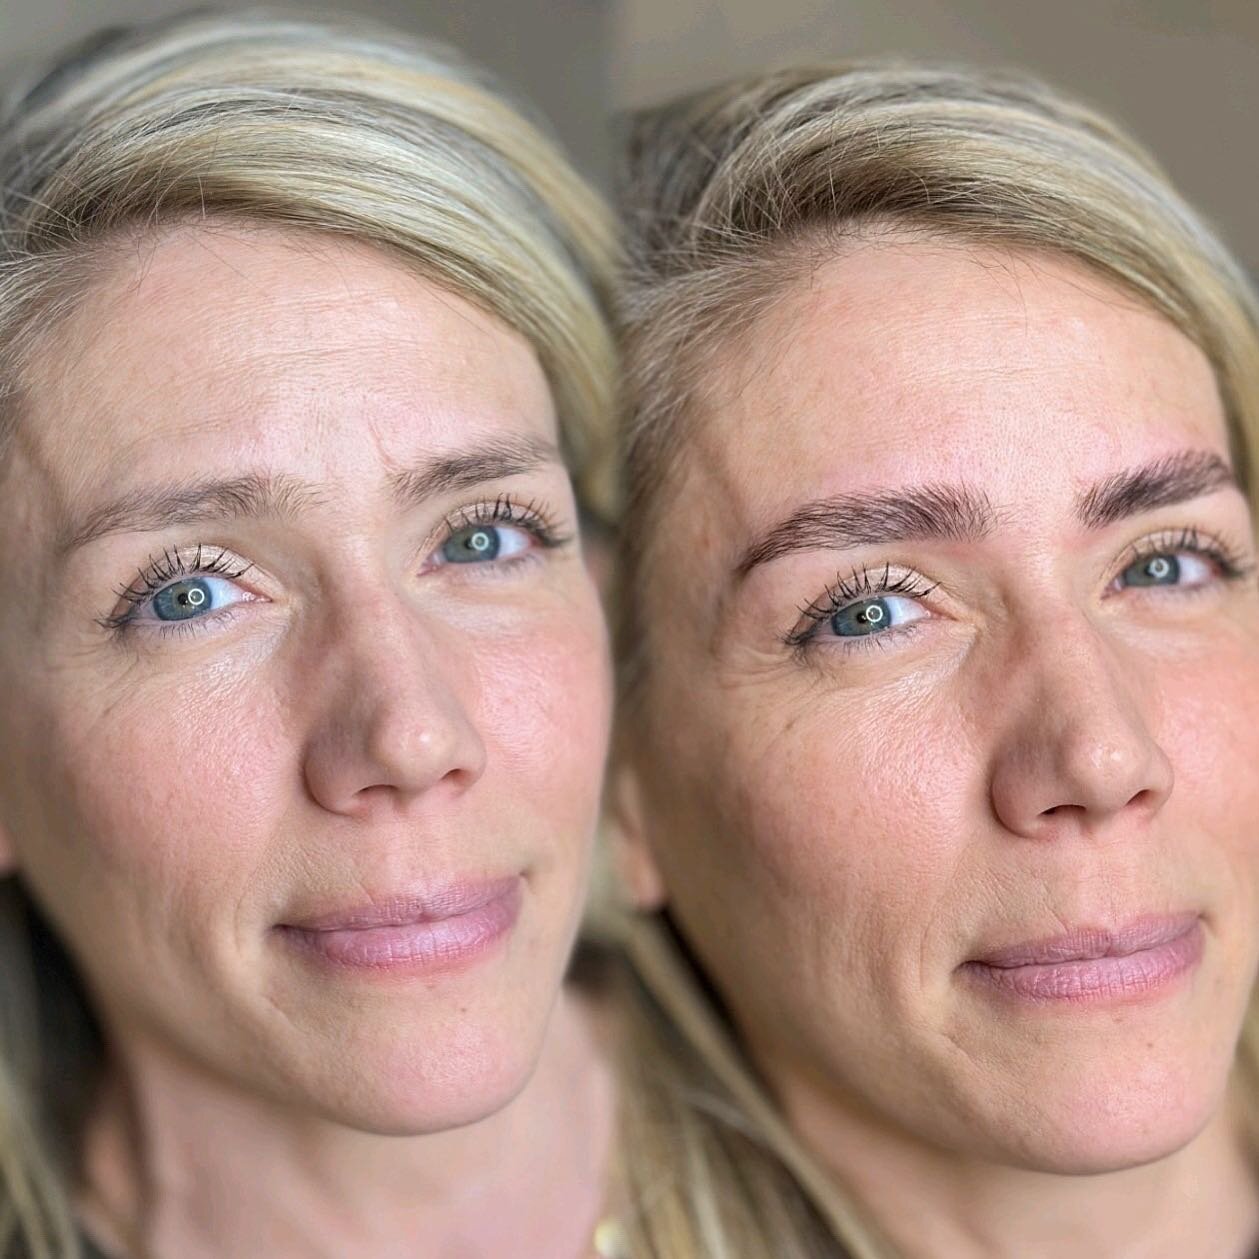 For those clients who are not ready for permanent make up but want to enhance their natural features a bit, a brow lift/tint/tweeze will do it! A brow lift is a relaxer that helps you to manipulate and fluff the brow hair. A little bit different than